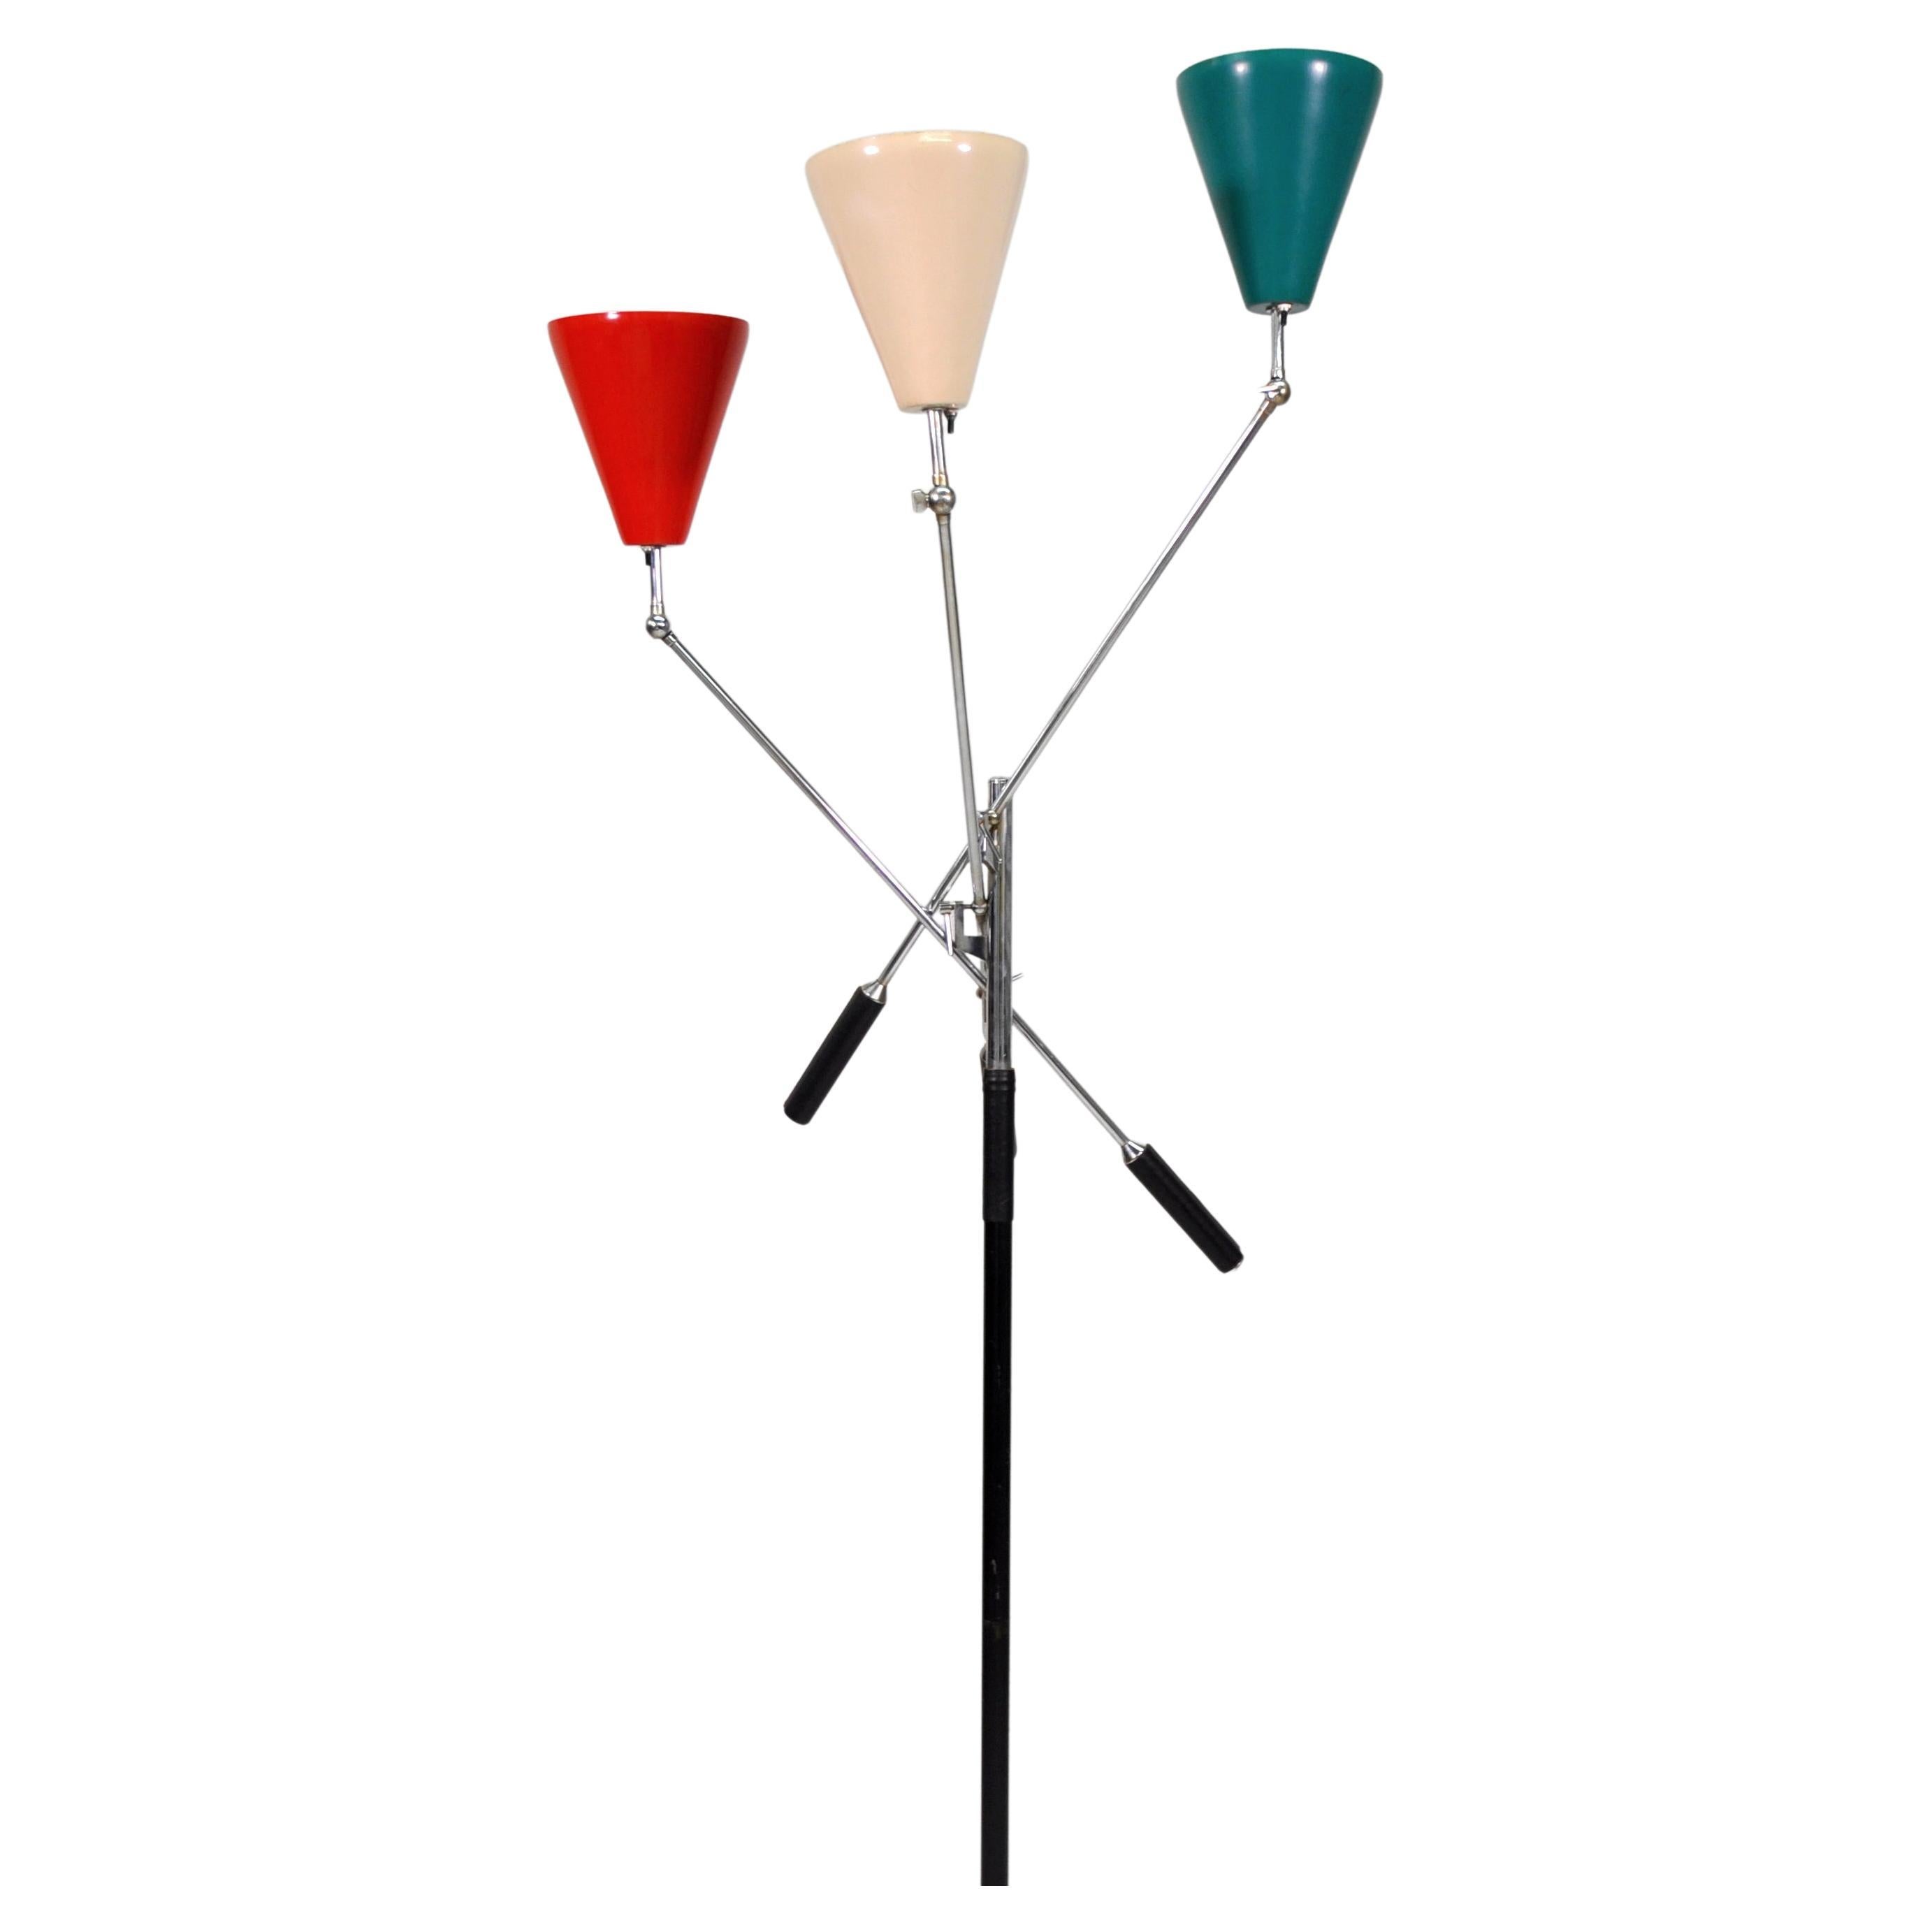 1950s Italian Triennale Floor Lamp by Arredoluce in Chrome, White, Red & Teal In Good Condition For Sale In Miami, FL